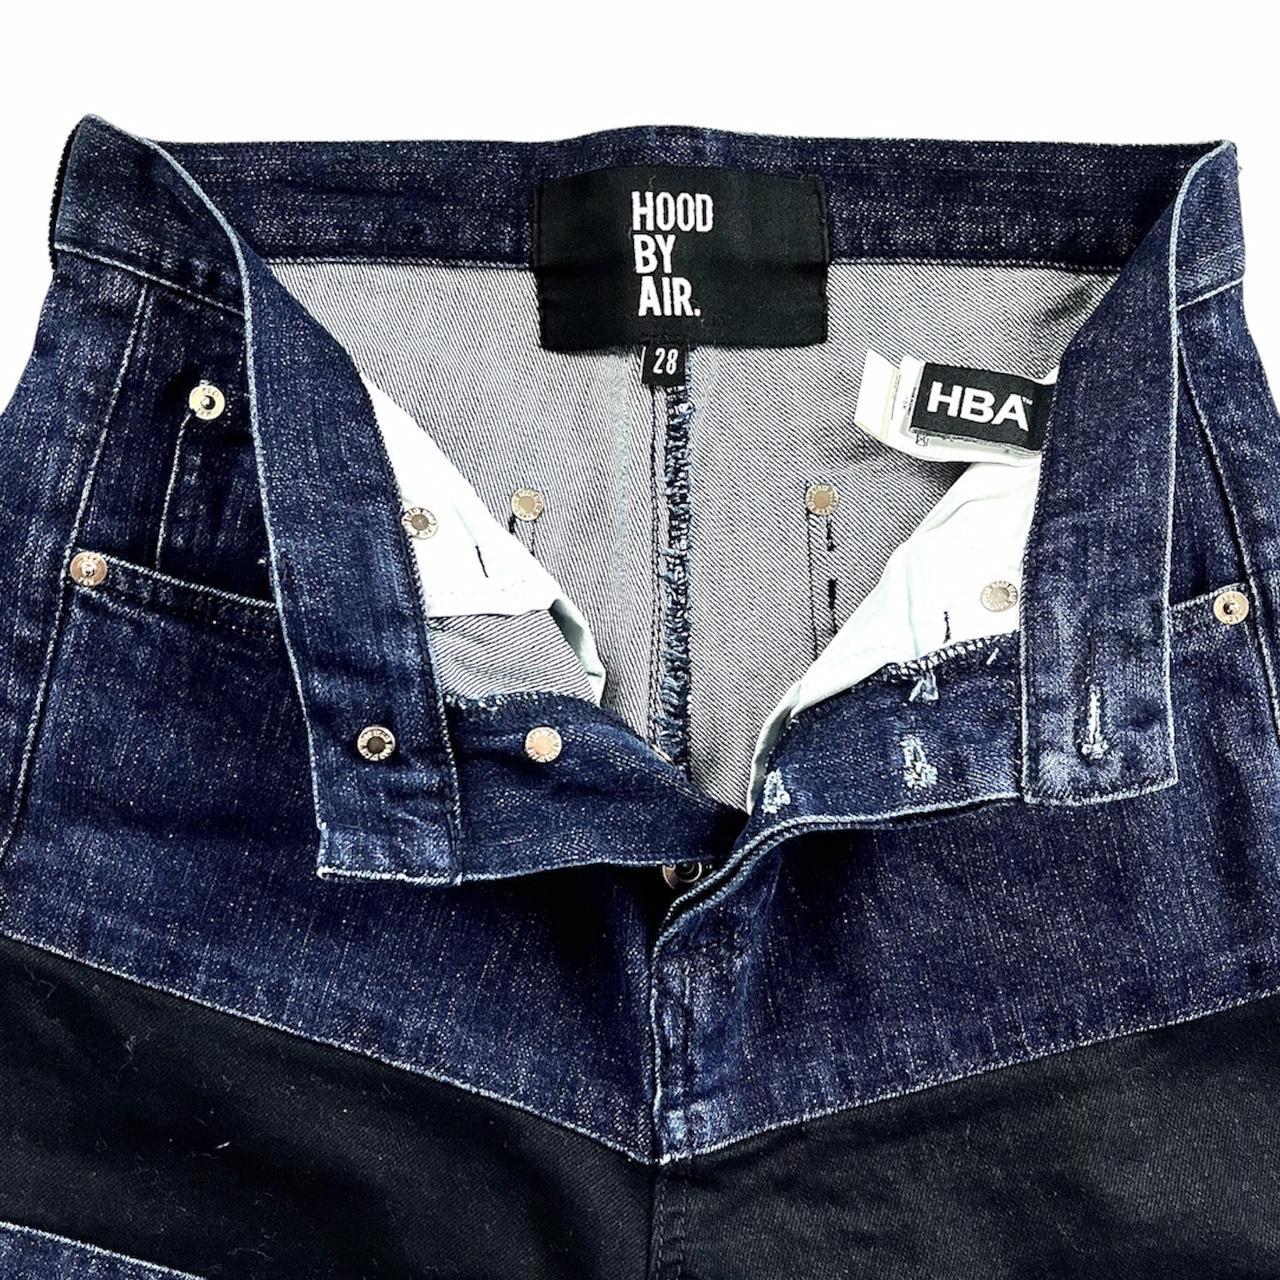 Hood By Air Men's Black and Blue Jeans (4)